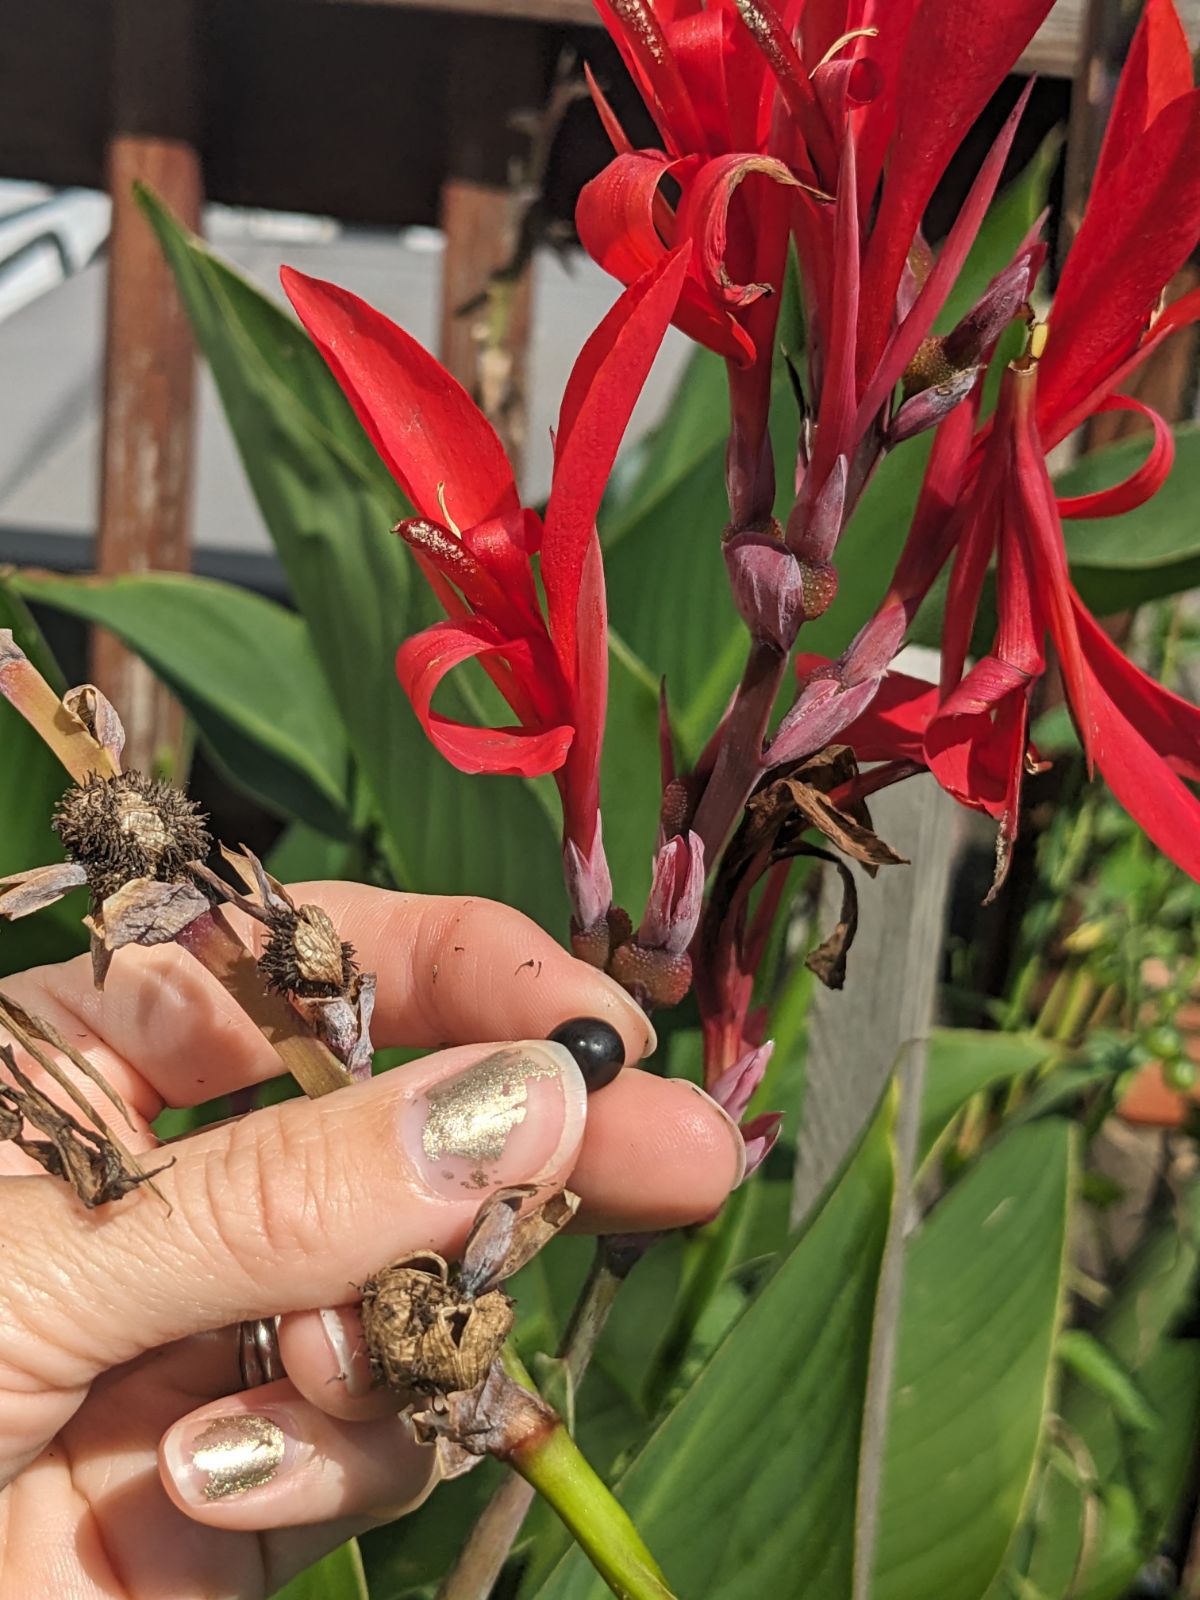 Hand holding canna lily seeds next to red cannas 